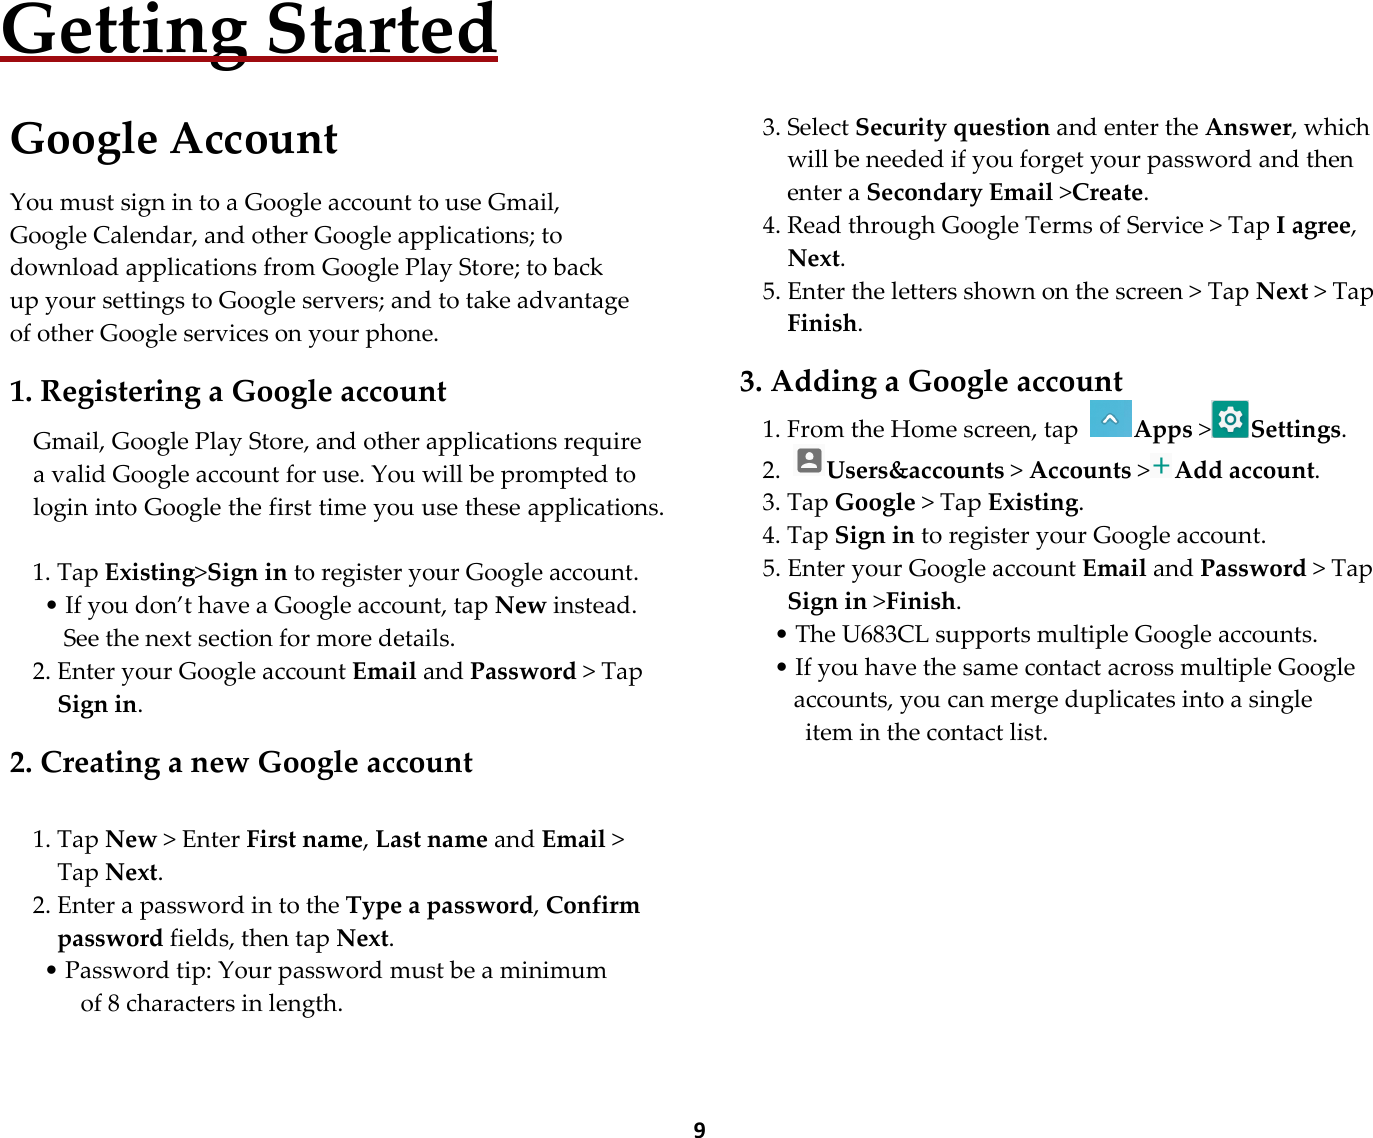  9Getting Started  Google Account  You must sign in to a Google account to use Gmail, Google Calendar, and other Google applications; to download applications from Google Play Store; to back up your settings to Google servers; and to take advantage of other Google services on your phone.  1. Registering a Google account  Gmail, Google Play Store, and other applications require a valid Google account for use. You will be prompted to login into Google the first time you use these applications.  1. Tap Existing&gt;Sign in to register your Google account. • If you don’t have a Google account, tap New instead. See the next section for more details. 2. Enter your Google account Email and Password &gt; Tap Sign in.  2. Creating a new Google account  1. Tap New &gt; Enter First name, Last name and Email &gt; Tap Next. 2. Enter a password in to the Type a password, Confirm password fields, then tap Next. • Password tip: Your password must be a minimum       of 8 characters in length.      3. Select Security question and enter the Answer, which will be needed if you forget your password and then enter a Secondary Email &gt;Create. 4. Read through Google Terms of Service &gt; Tap I agree, Next. 5. Enter the letters shown on the screen &gt; Tap Next &gt; Tap Finish.  3. Adding a Google account 1. From the Home screen, tap Apps &gt;Settings. 2. Users&amp;accounts &gt; Accounts &gt;Add account. 3. Tap Google &gt; Tap Existing. 4. Tap Sign in to register your Google account. 5. Enter your Google account Email and Password &gt; Tap Sign in &gt;Finish. • The U683CL supports multiple Google accounts. • If you have the same contact across multiple Google accounts, you can merge duplicates into a single   item in the contact list.         